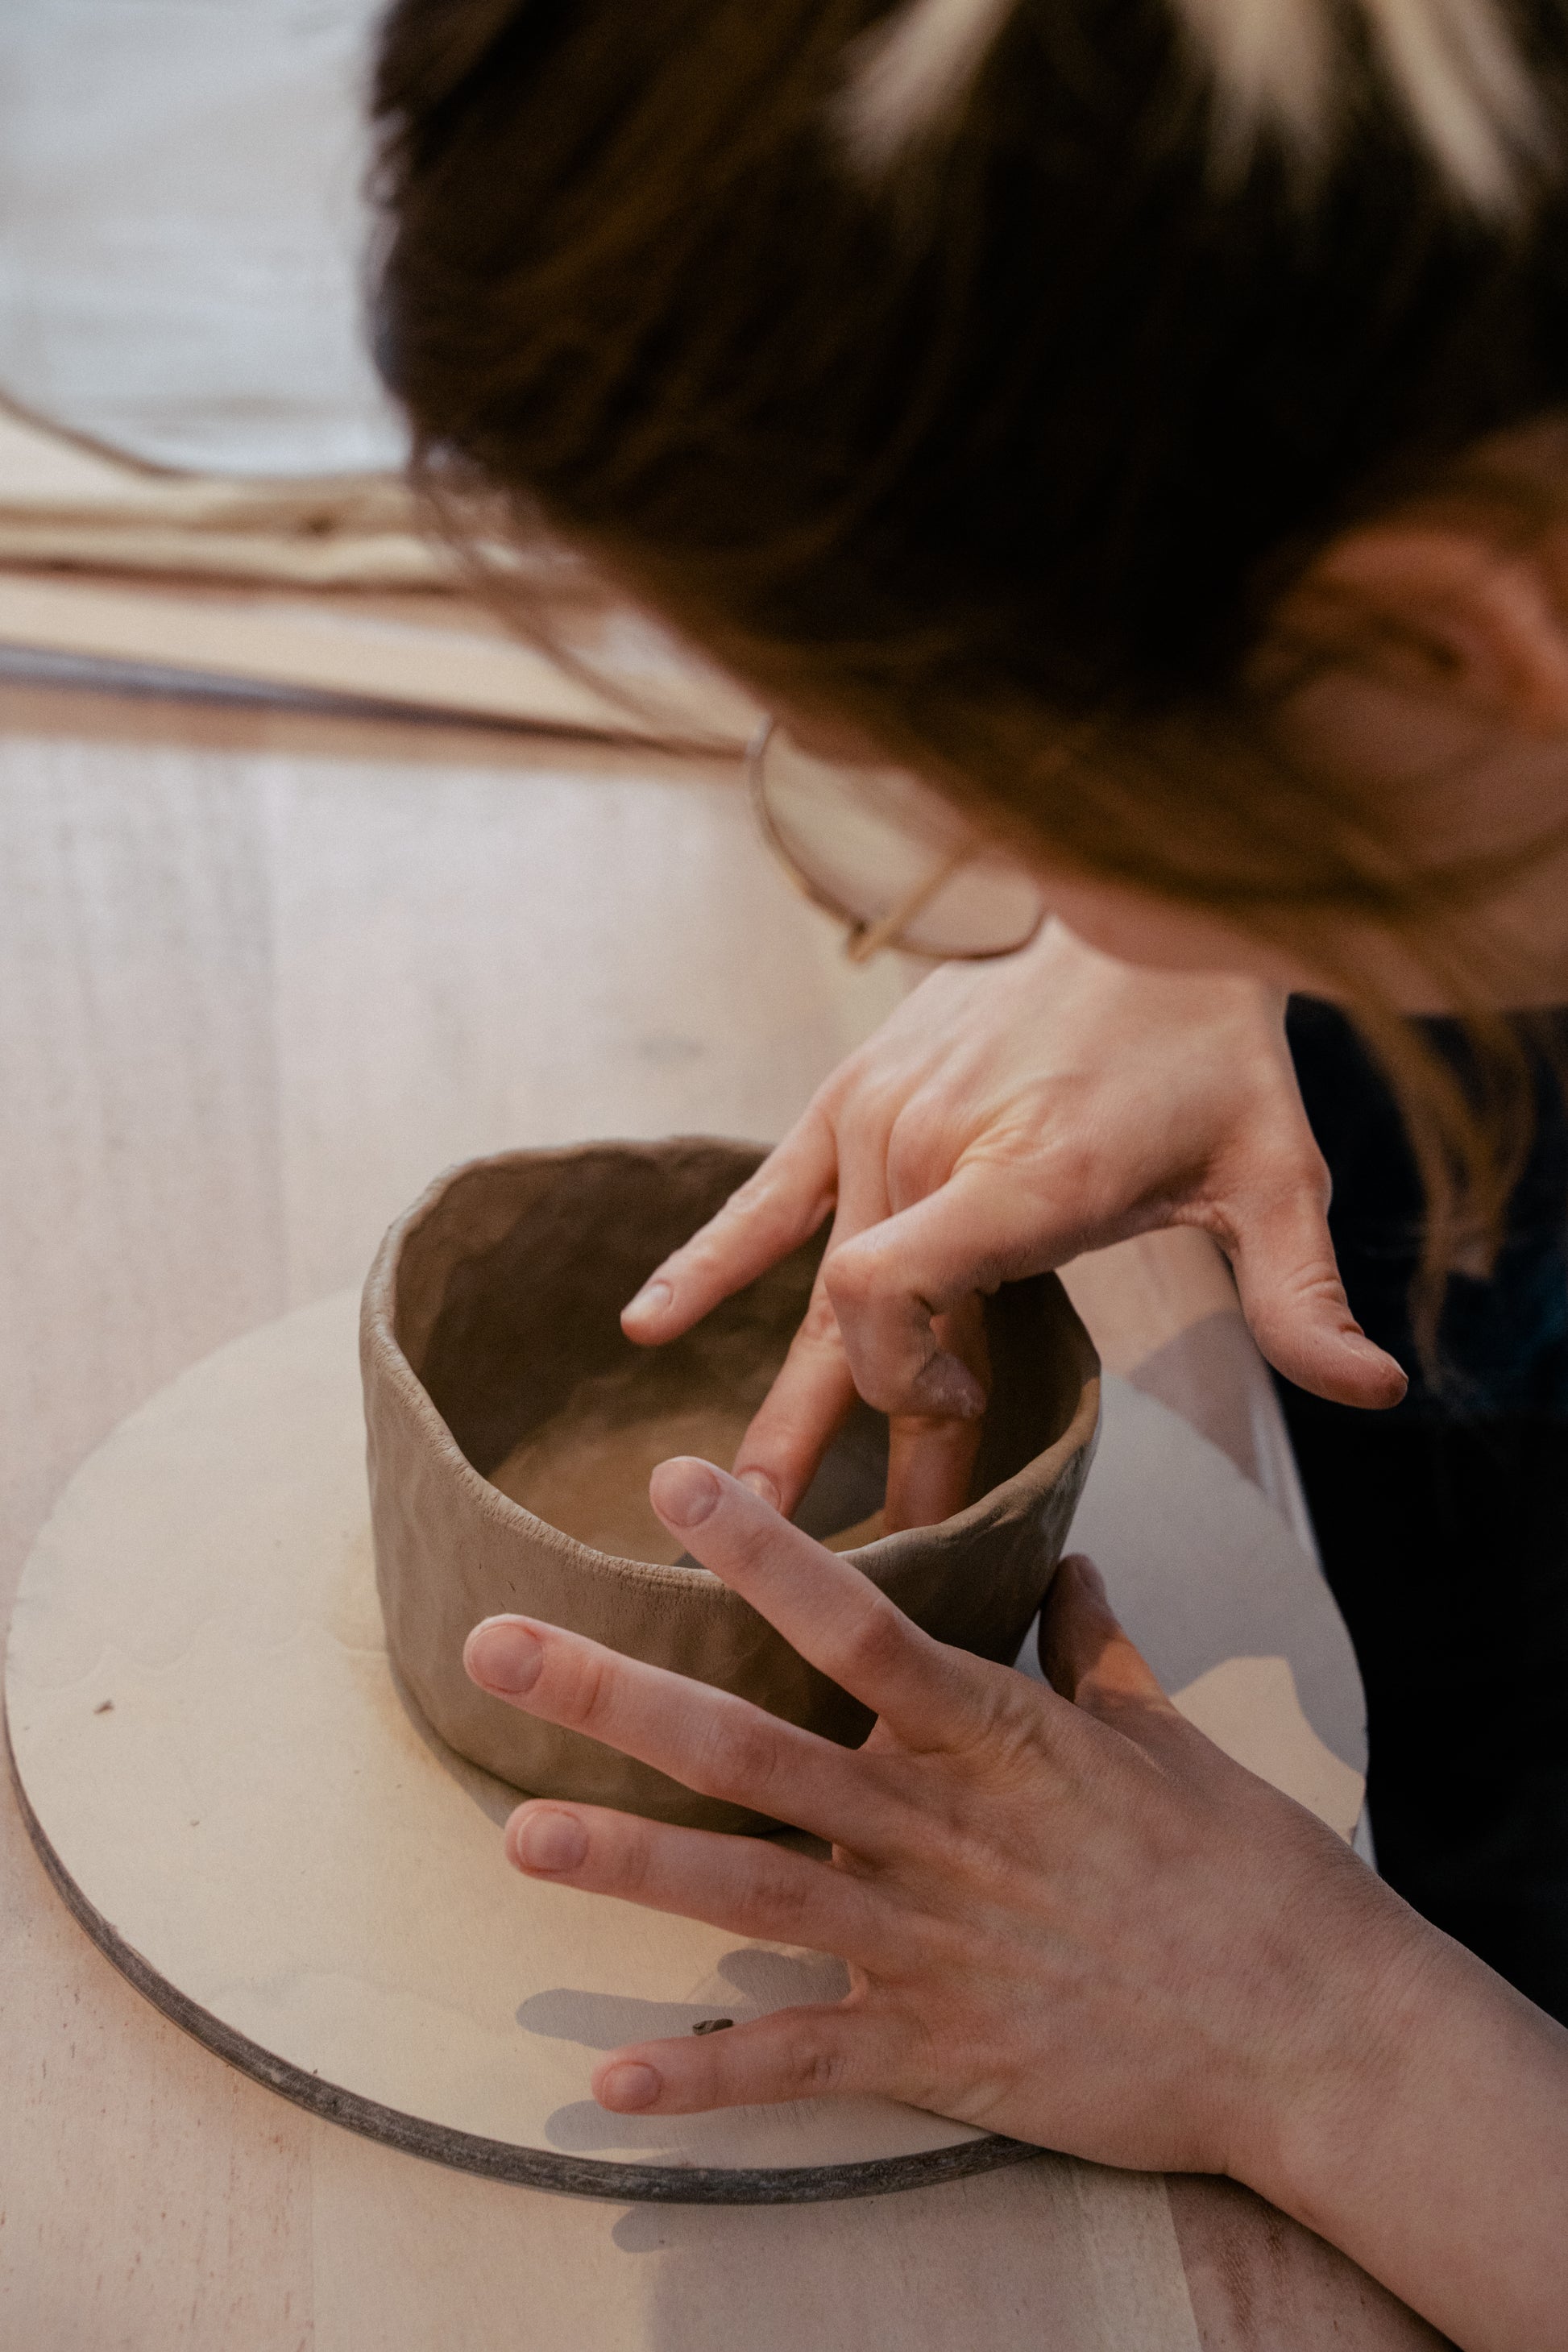 Team Building Pottery Workshop with Barsega Studio in Berlin, Germany by subcultours